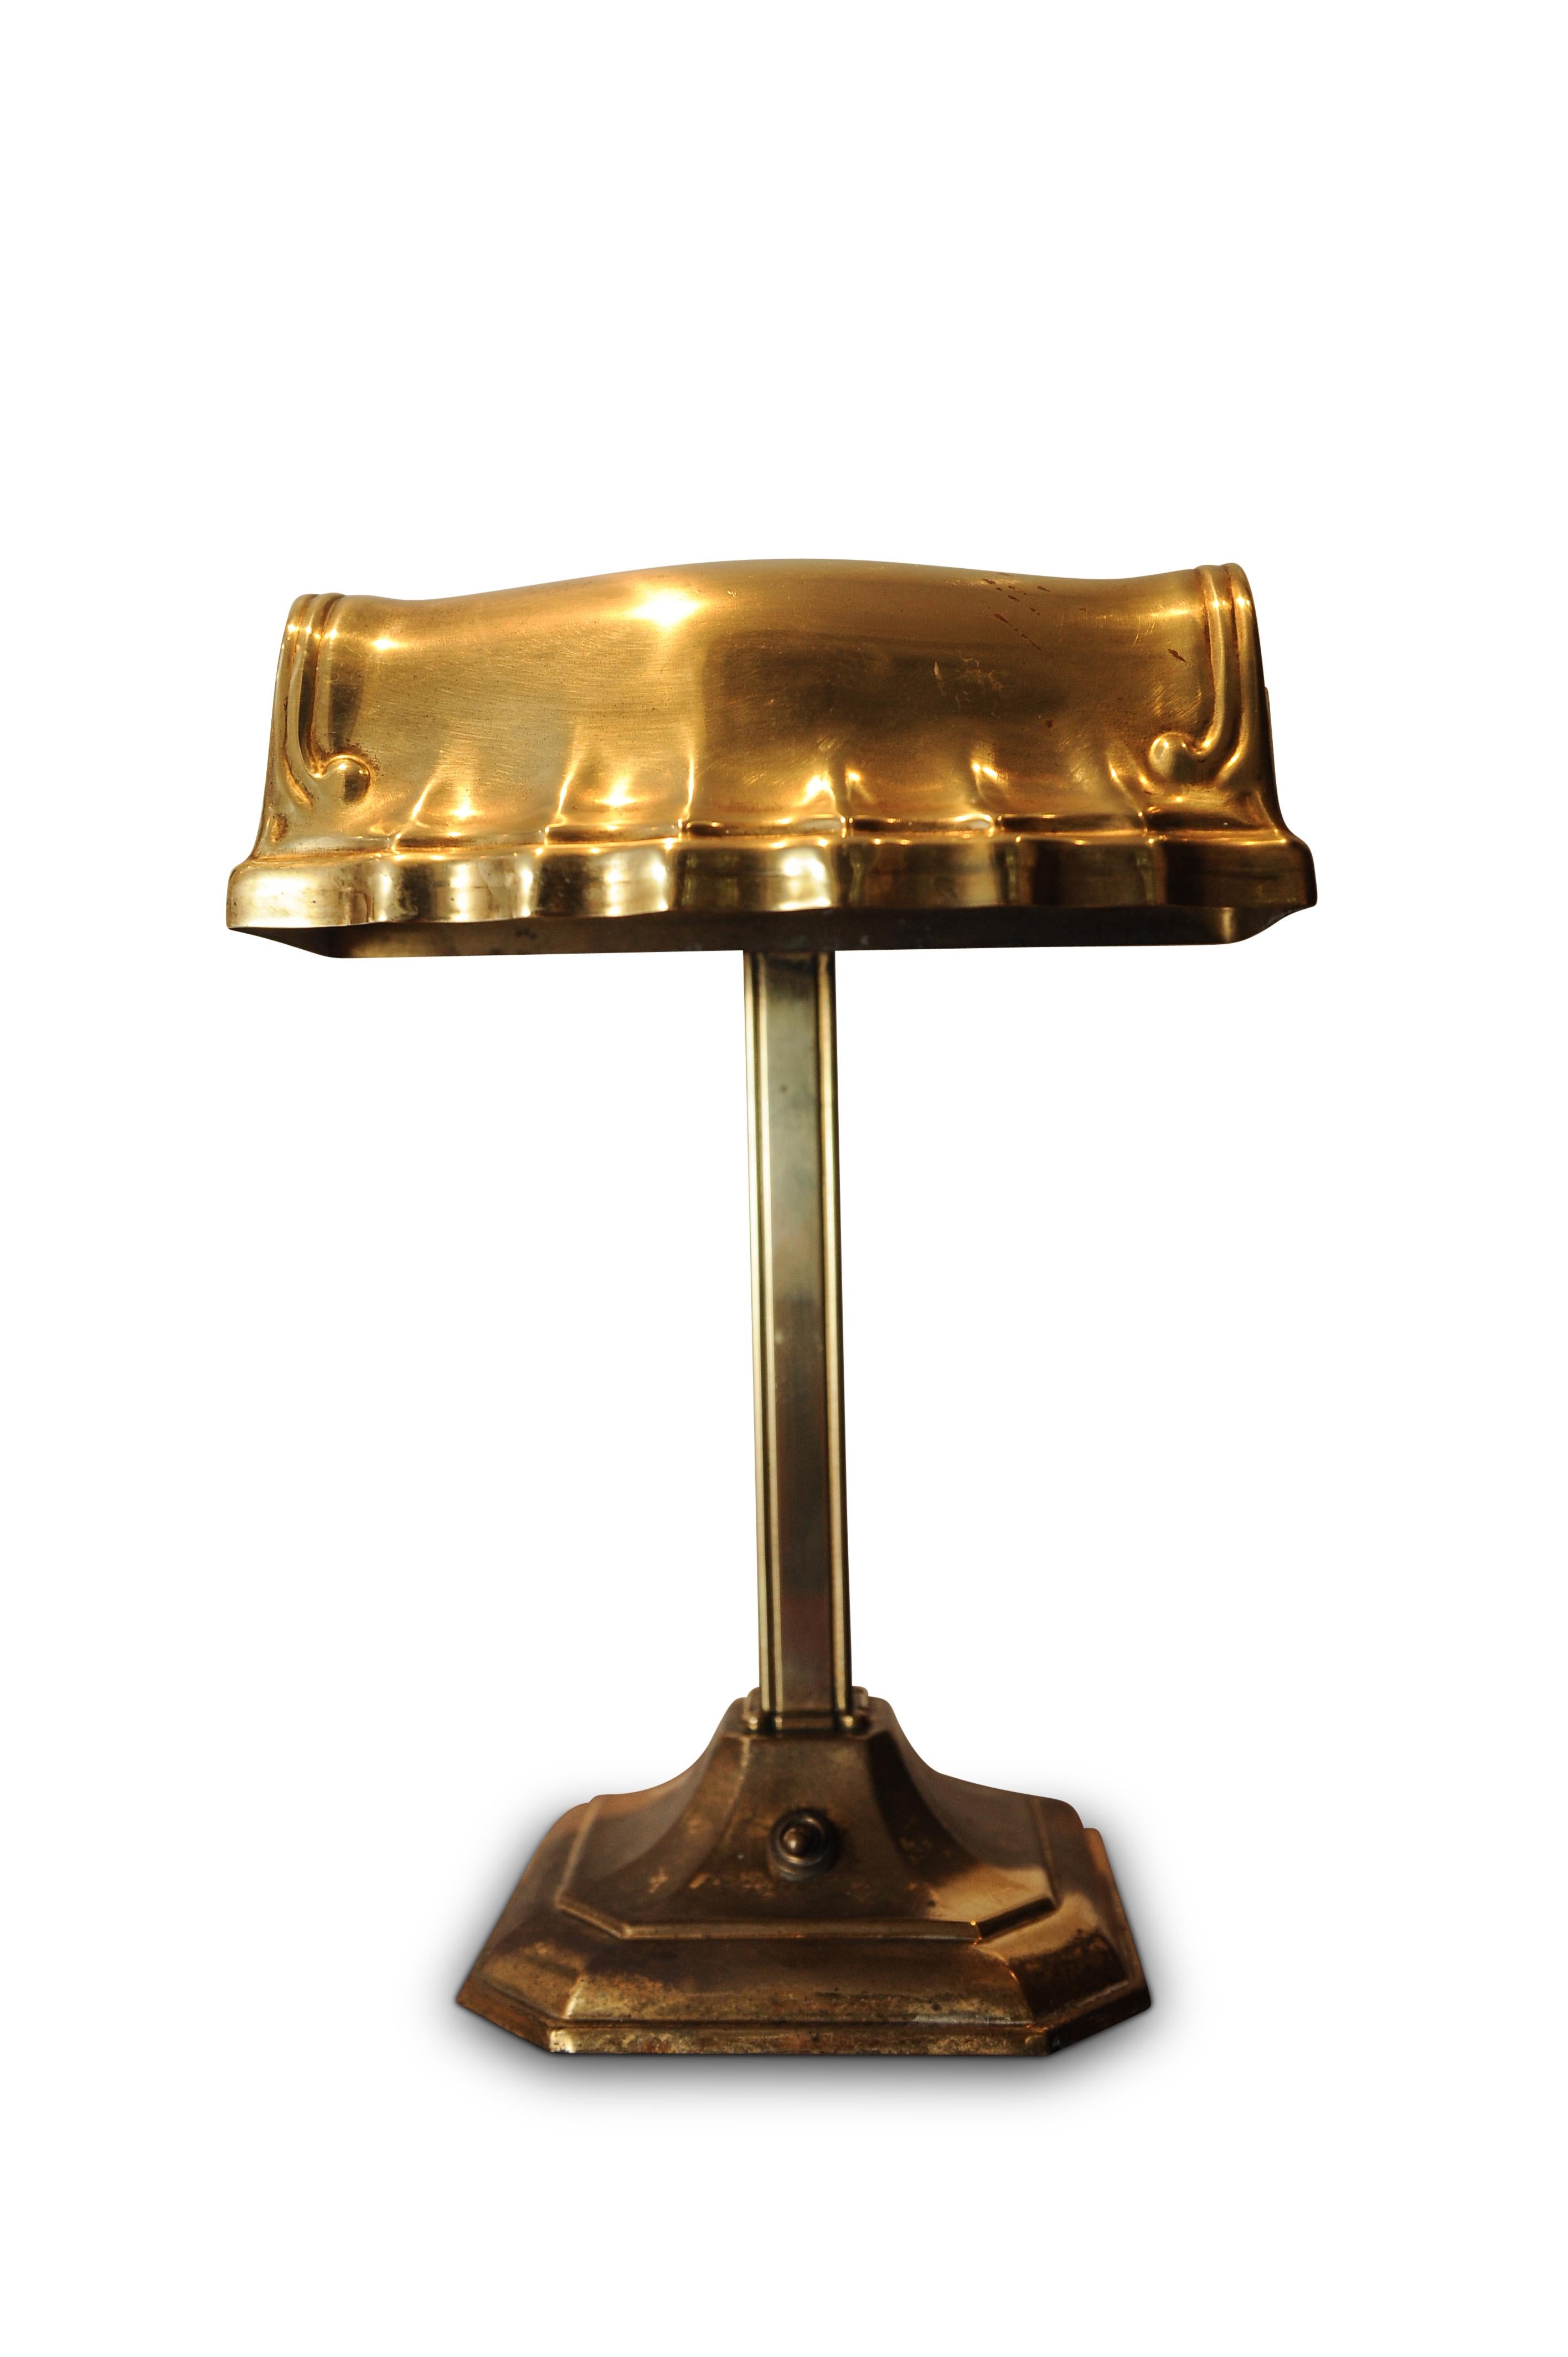 A good early 20th century solid brass adjustable bankers desk lamp, raised on a terraced square base and brass shade atop, with original fittings and switch.
Excellent patina to the brass.

Item has been tested and Pat Tested to UK